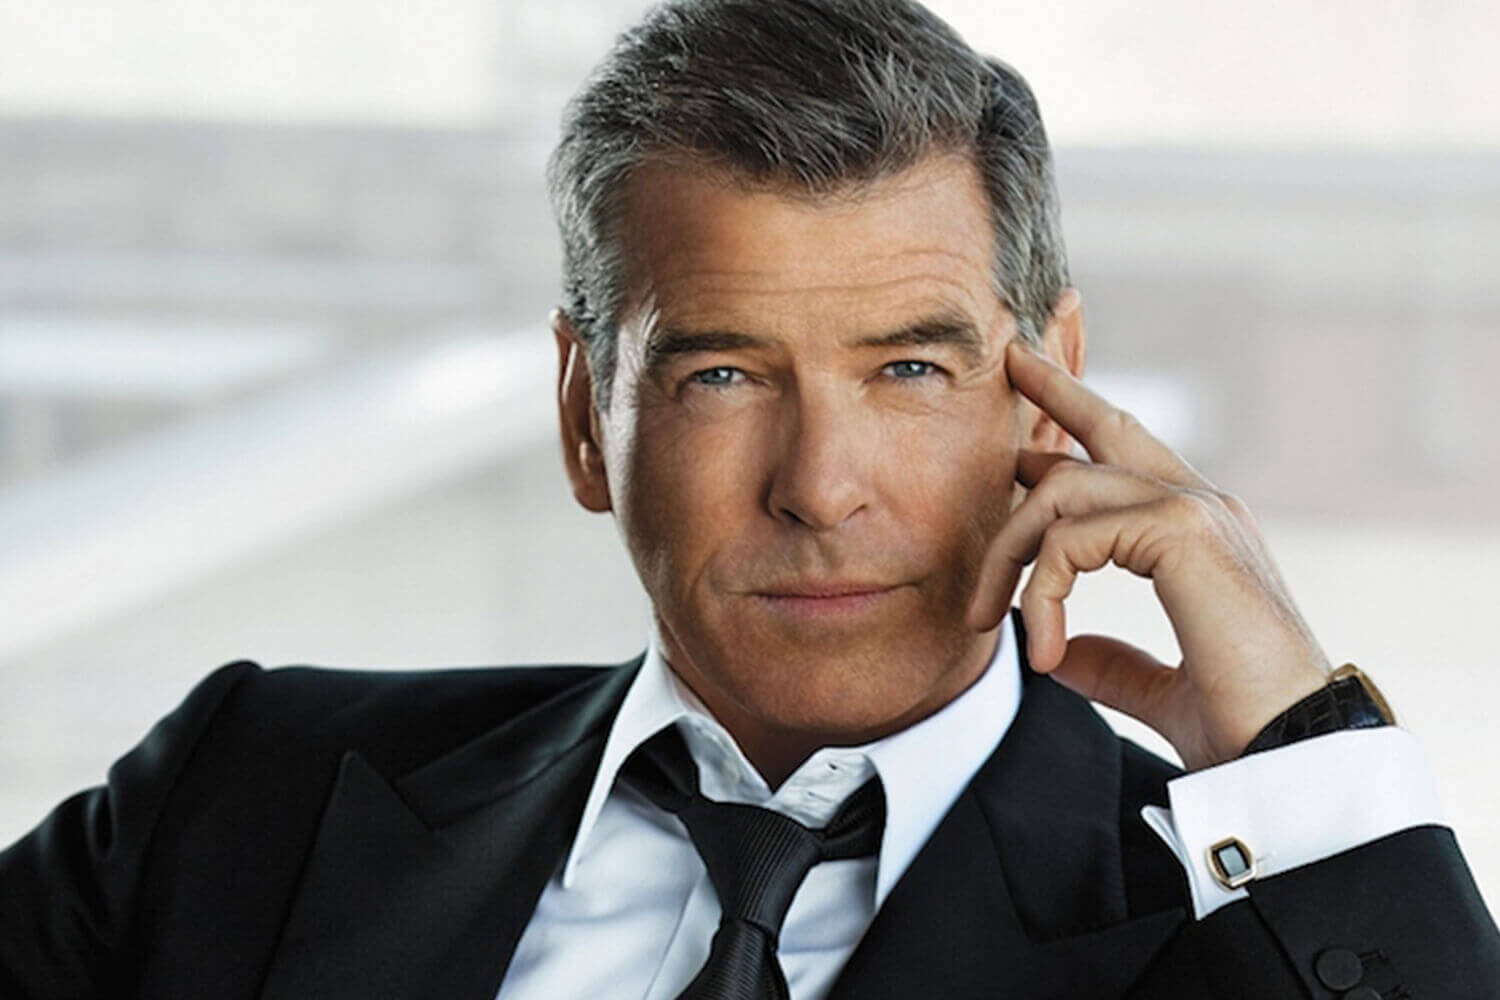 New Pierce Brosnan Movie To Start Filming In Abu Dhabi Arabianbusiness Born 16 may 1953) is an irish actor, film producer, and environmental activist. new pierce brosnan movie to start